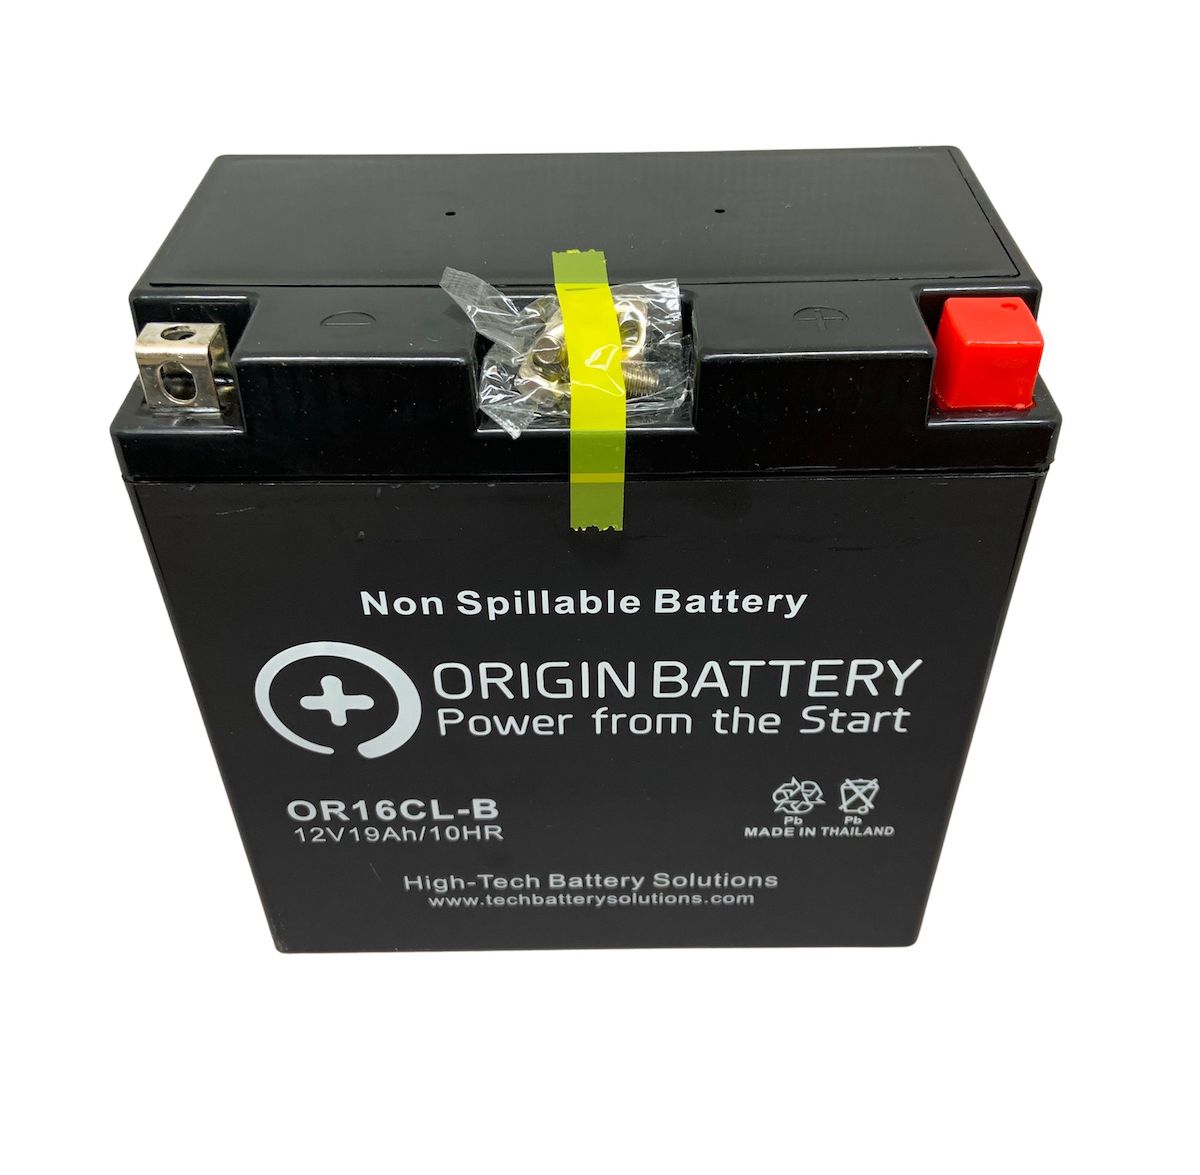 Replacement for Polaris battery part no. 4014132